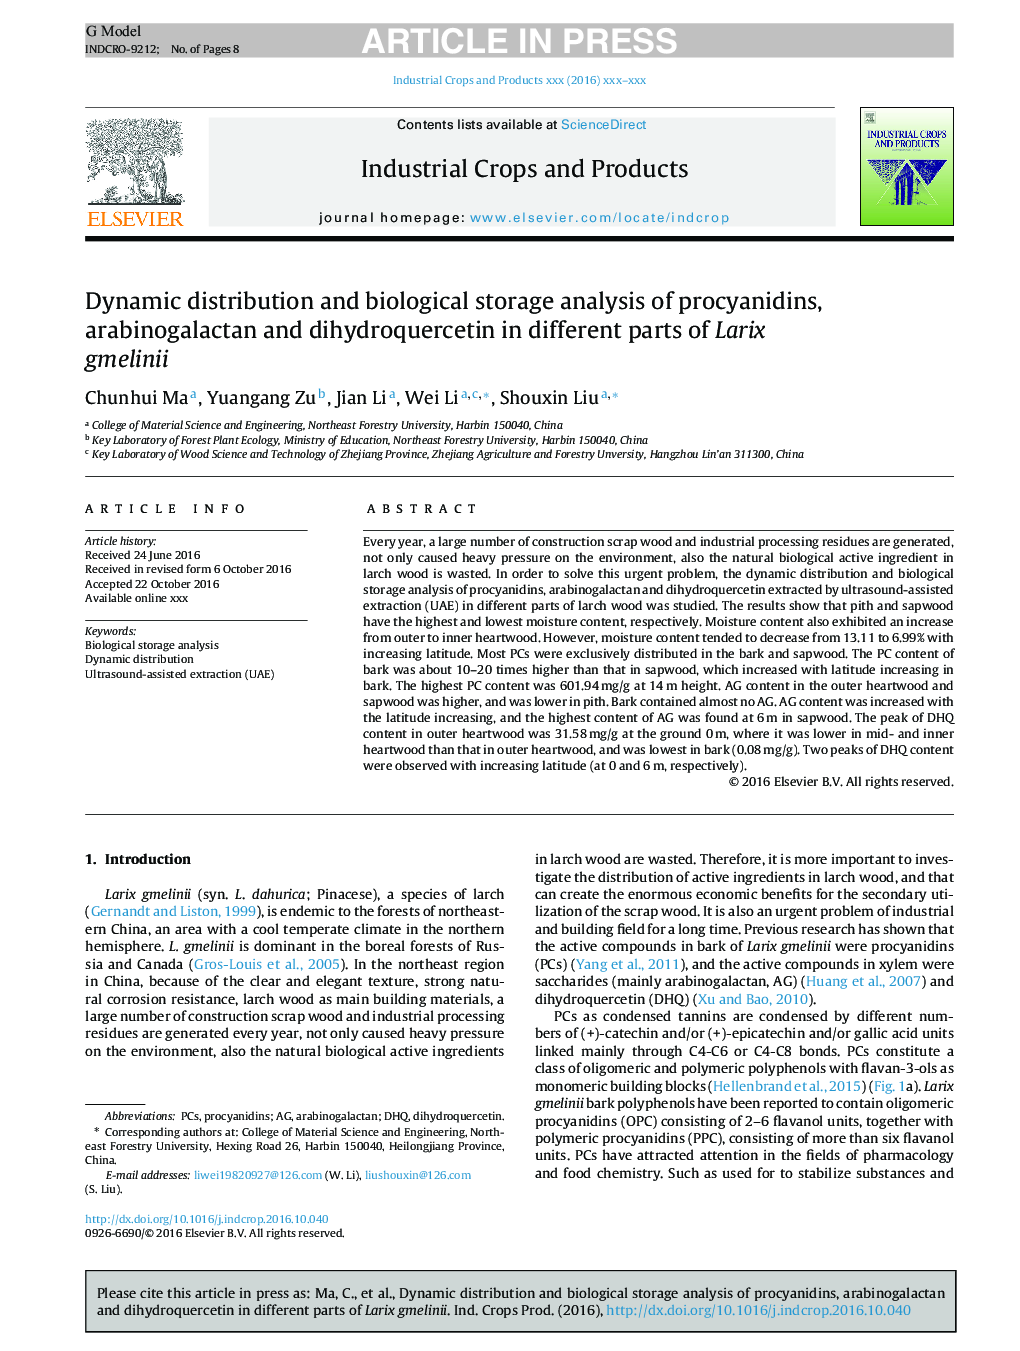 Dynamic distribution and biological storage analysis of procyanidins, arabinogalactan and dihydroquercetin in different parts of Larix gmelinii